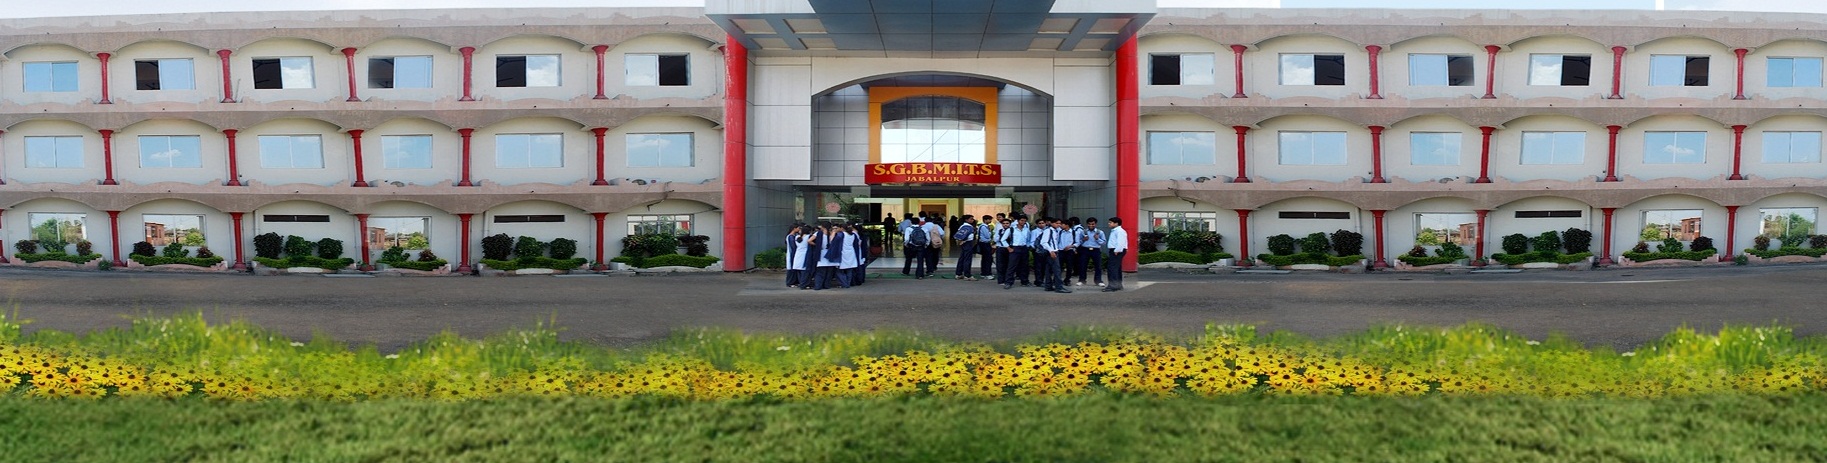 S.G.B.M. INSTITUTE OF TECHNOLOGY AND SCIENCE Image